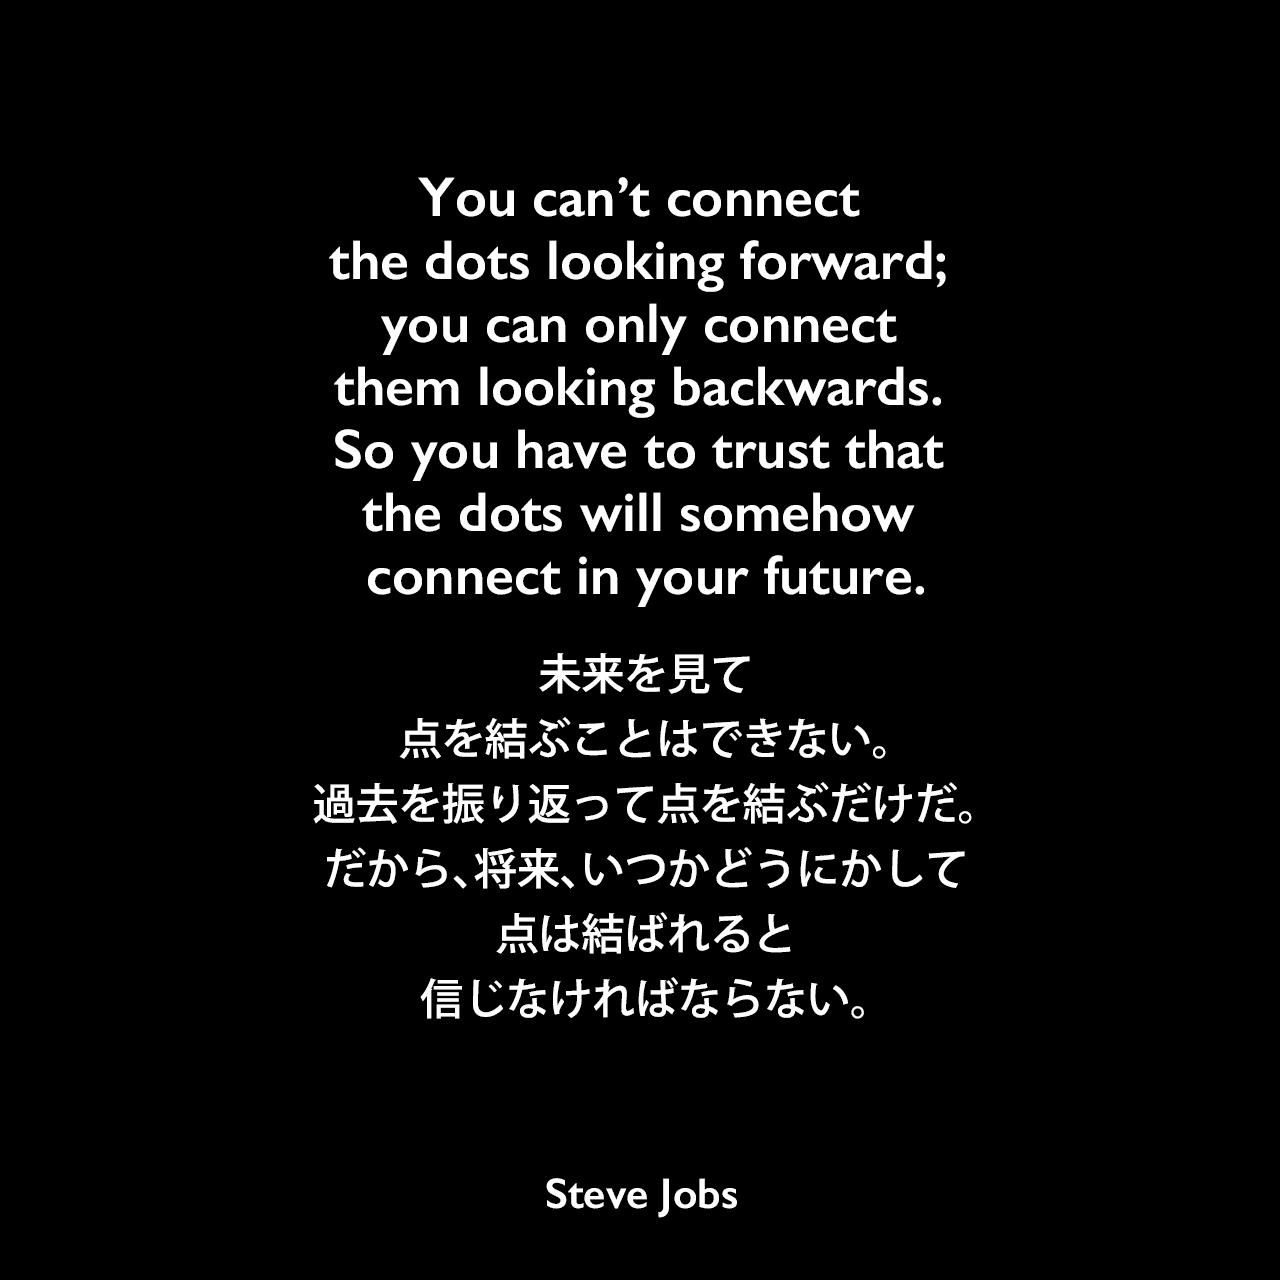 You can’t connect the dots looking forward; you can only connect them looking backwards. So you have to trust that the dots will somehow connect in your future.未来を見て、点を結ぶことはできない。過去を振り返って点を結ぶだけだ。だから、将来、いつかどうにかして点は結ばれると 信じなければならない。- Stanford University (2005年)でのスピーチ